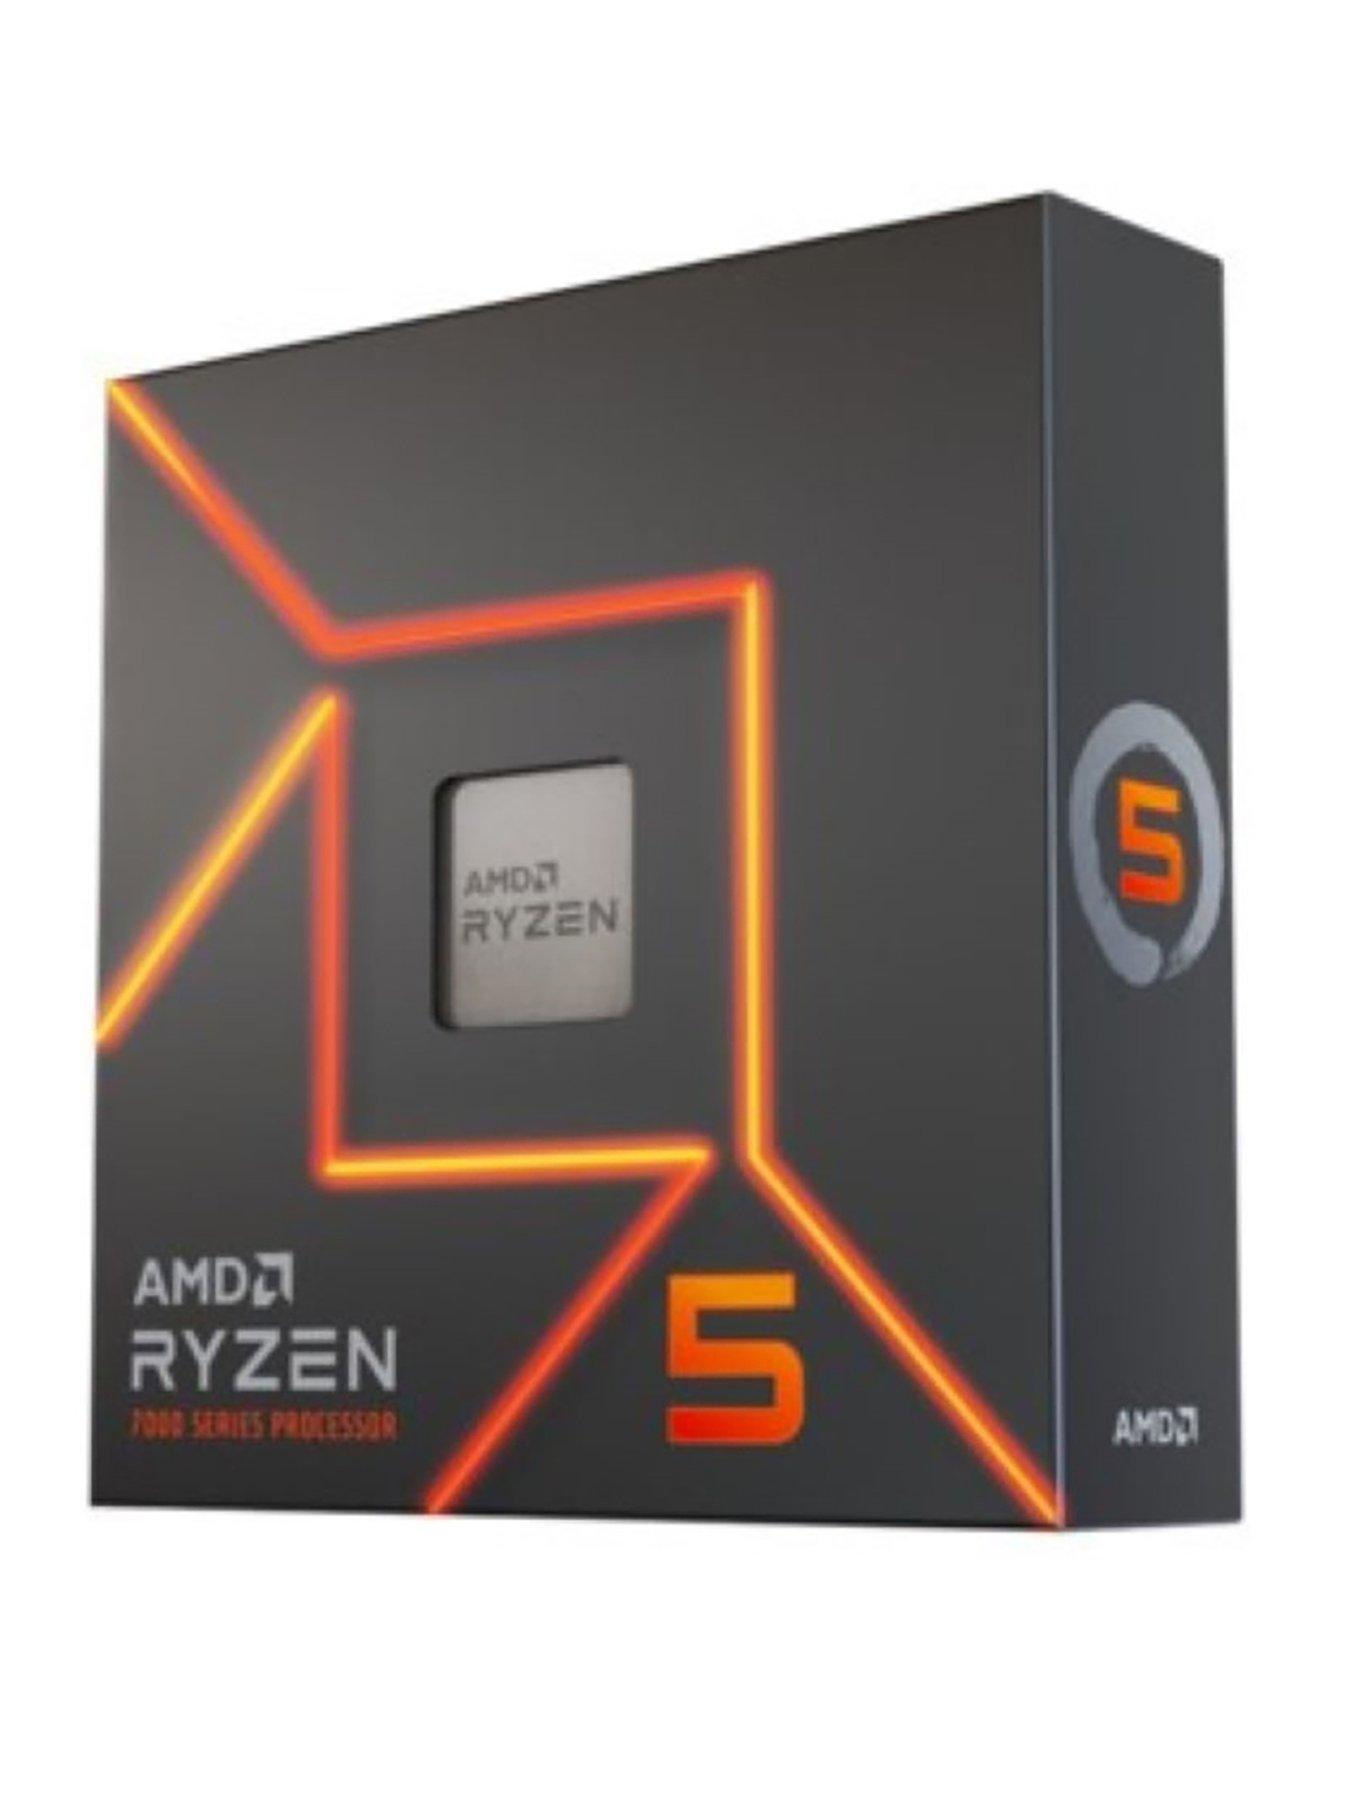 Ryzen 7 7800X3D, AMD's best gaming CPU is now available at $354 